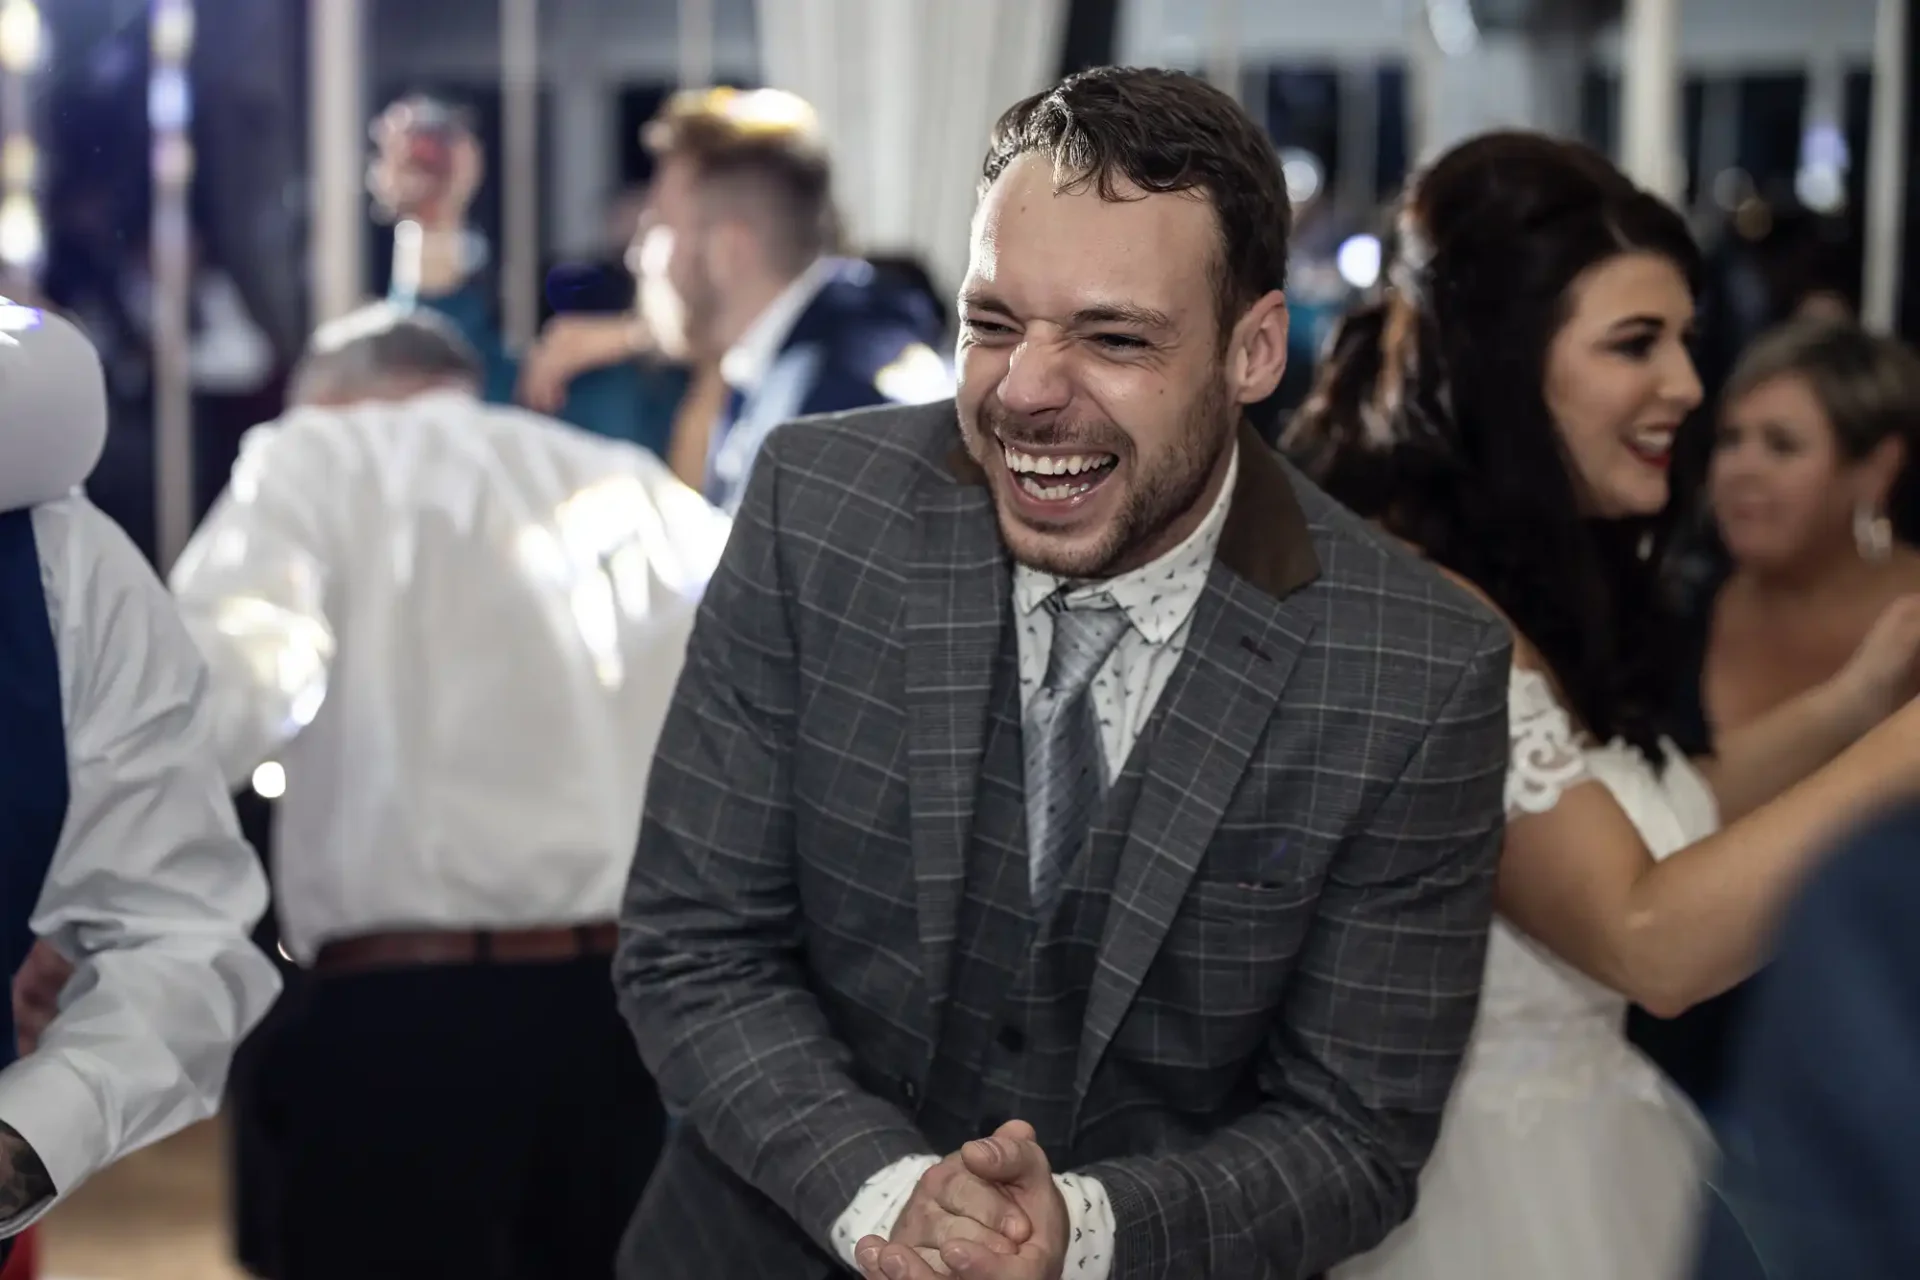 Laughing man in a gray suit claps hands at a wedding reception, with other guests and a bride in the background.